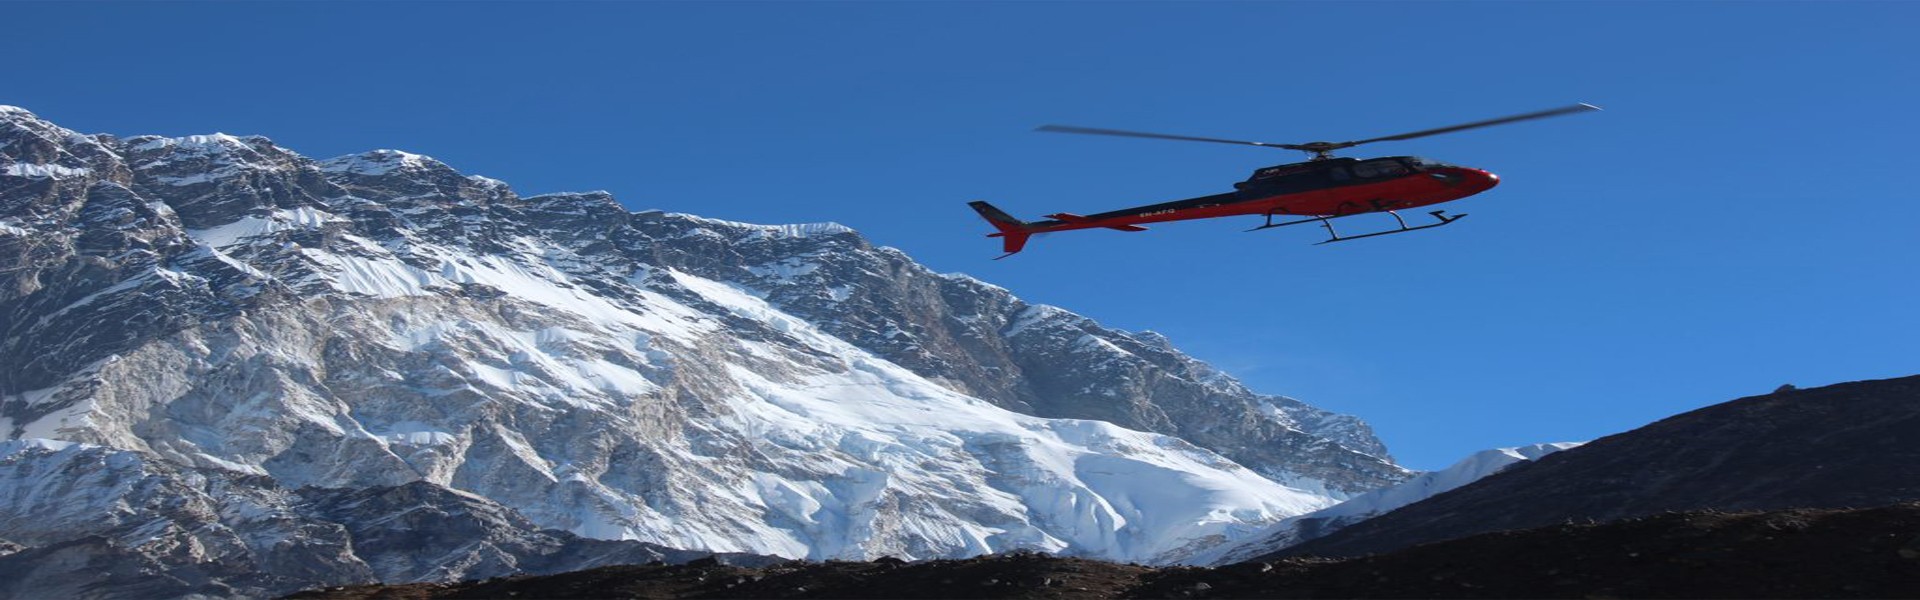 Annapurna Base Camp Helicopter Tour from Pokhara